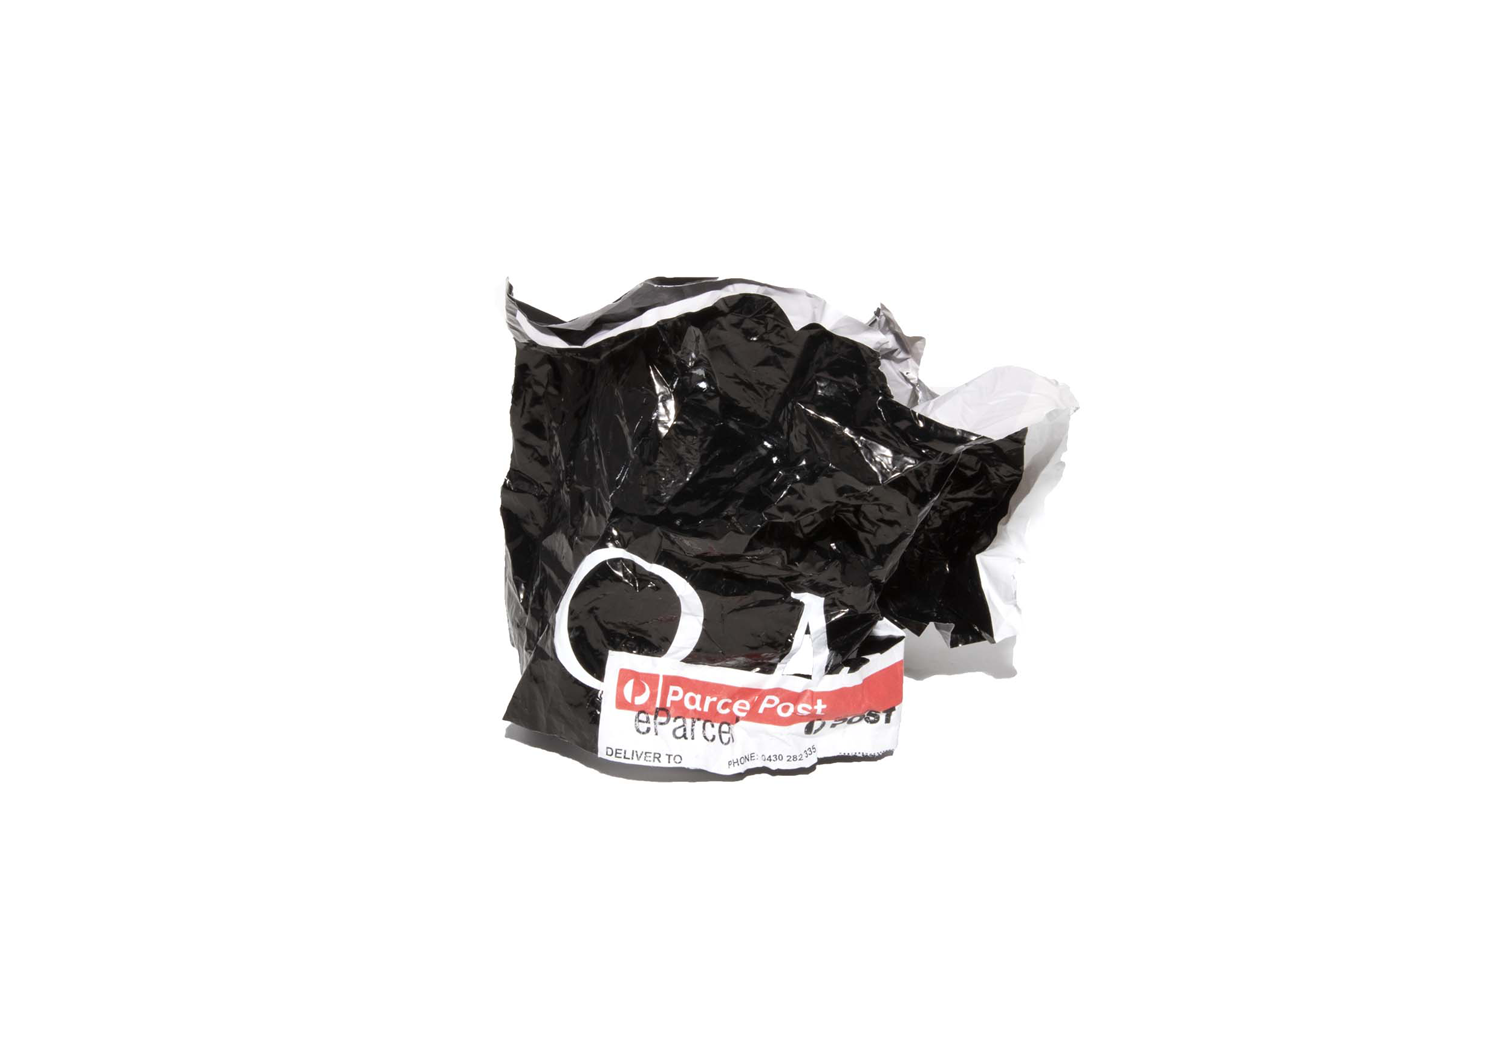 Colour photograph depicting crumpled postage packaging.